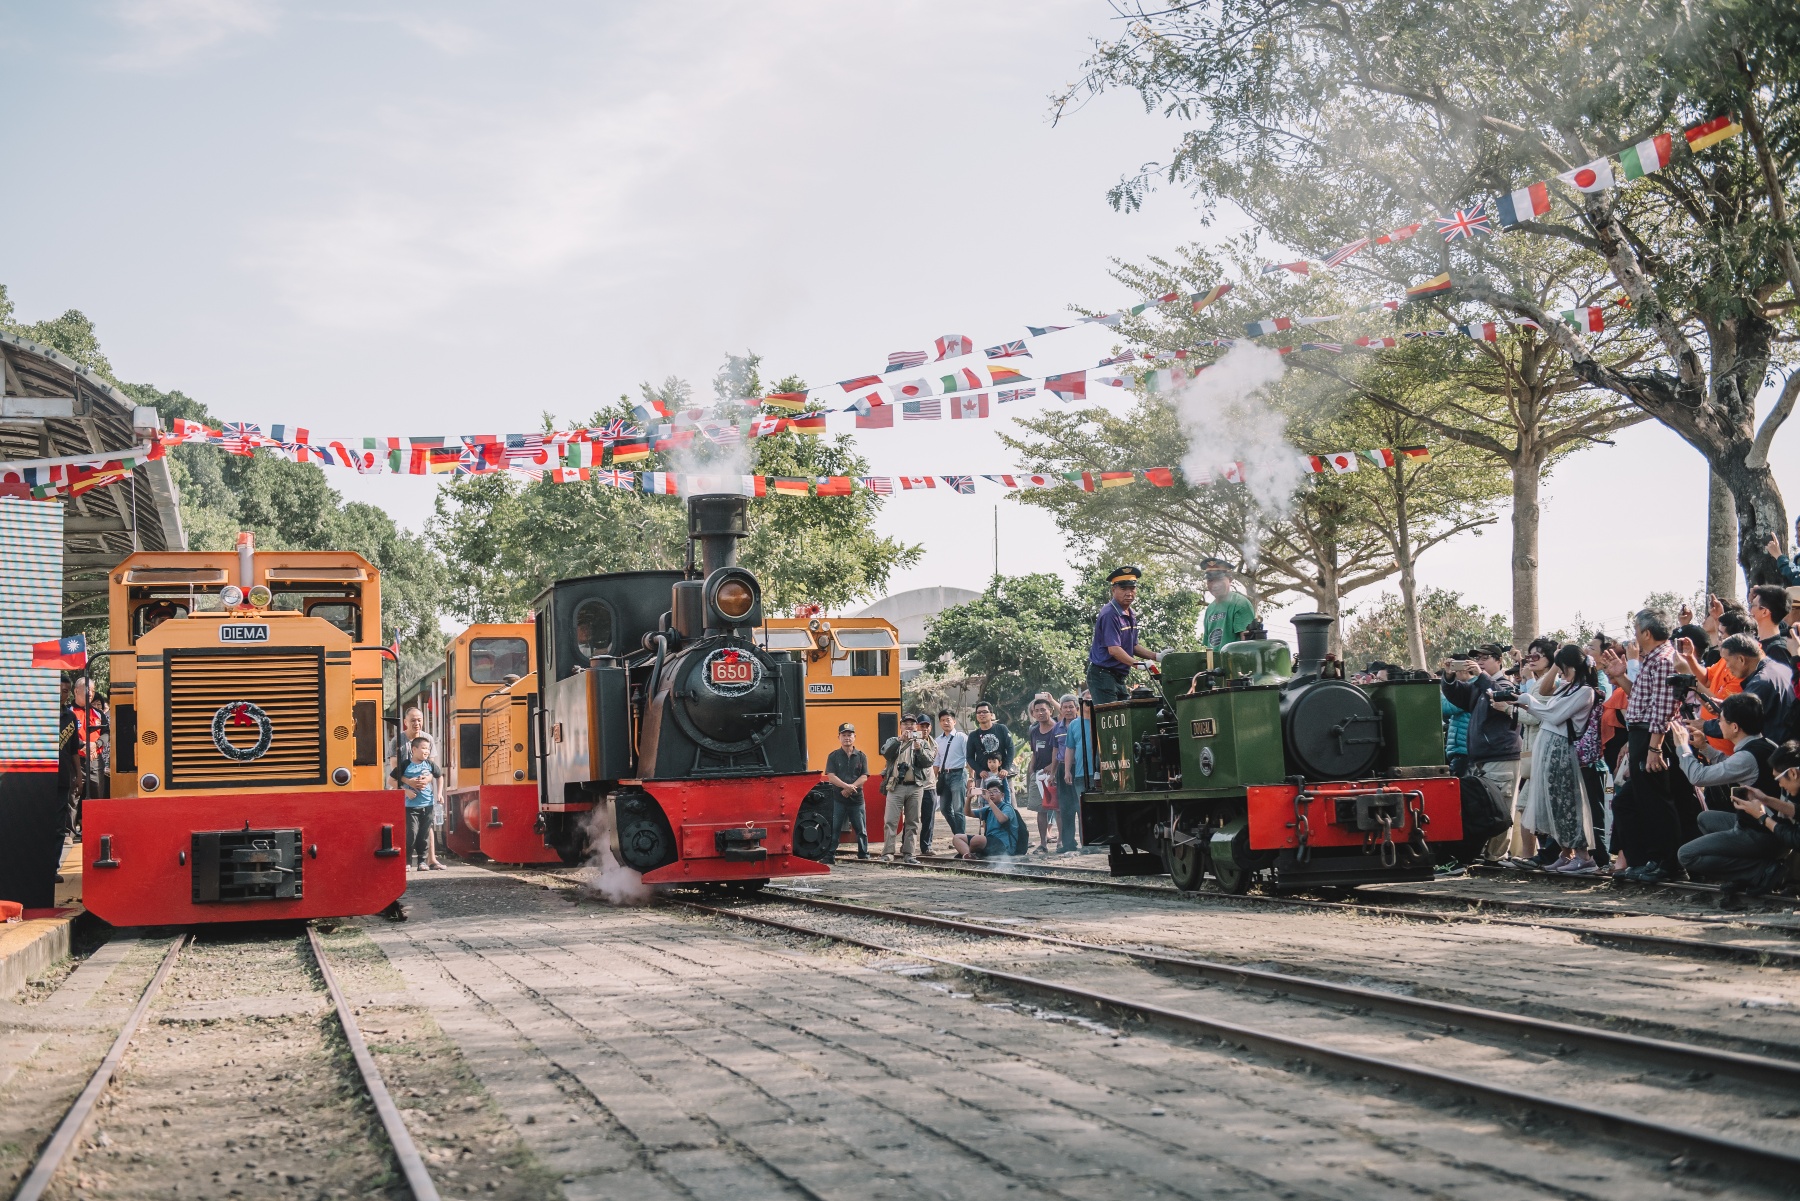 Dougal will restart and whistle with the steam locomotive of Taiwan sugar railways on December 8th.